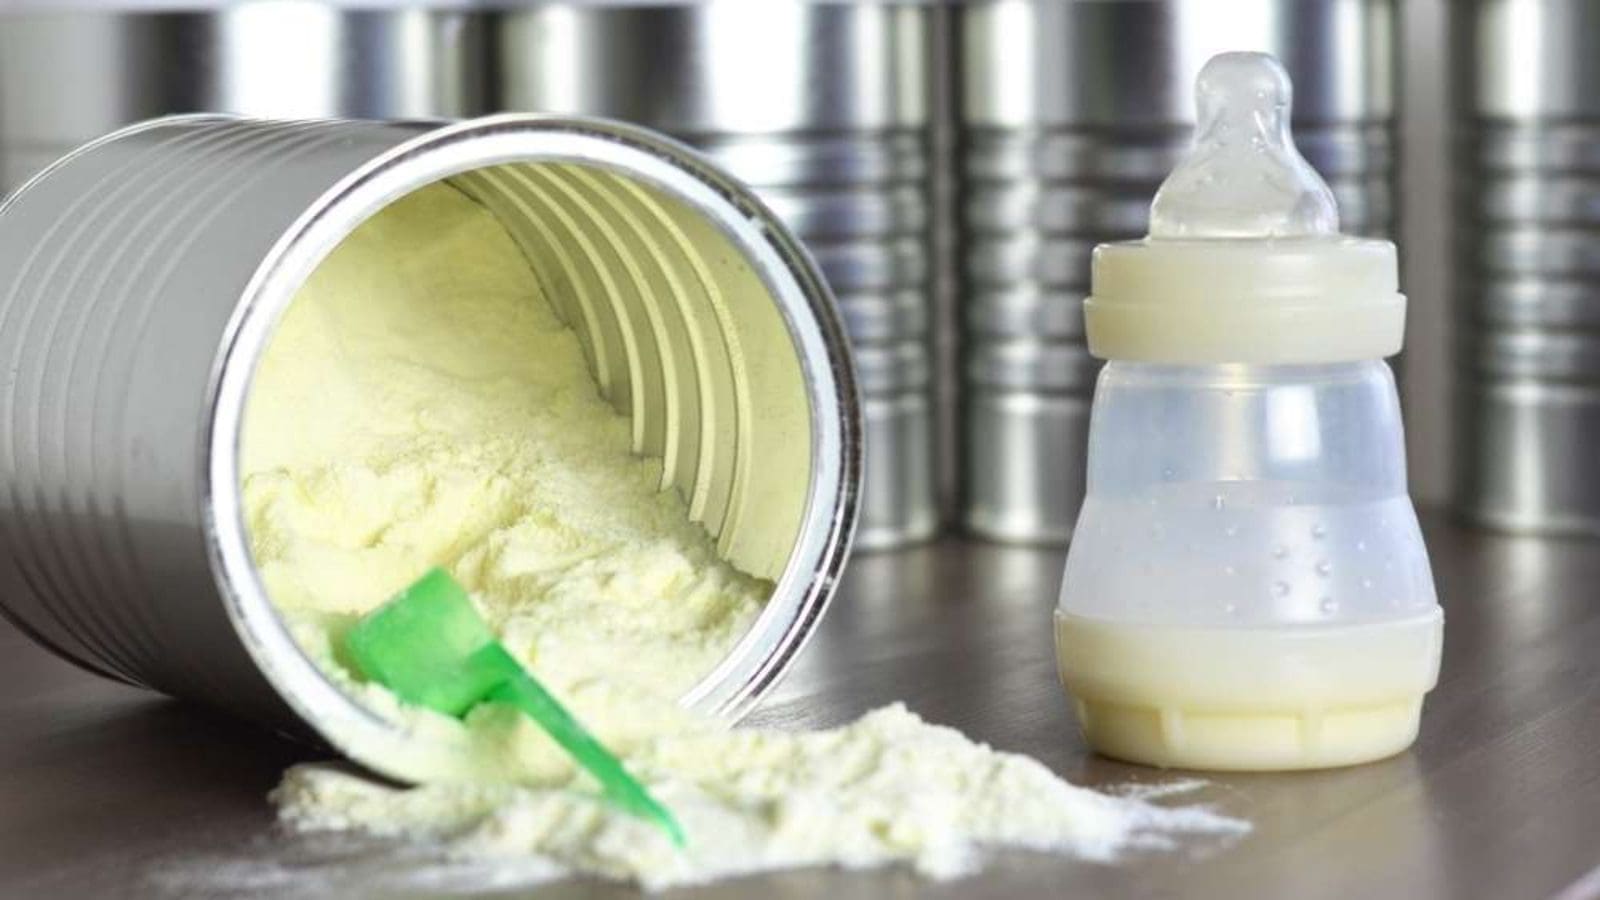 Danone develops infant formula from blend of plant and dairy protein to appeal to flexitarians